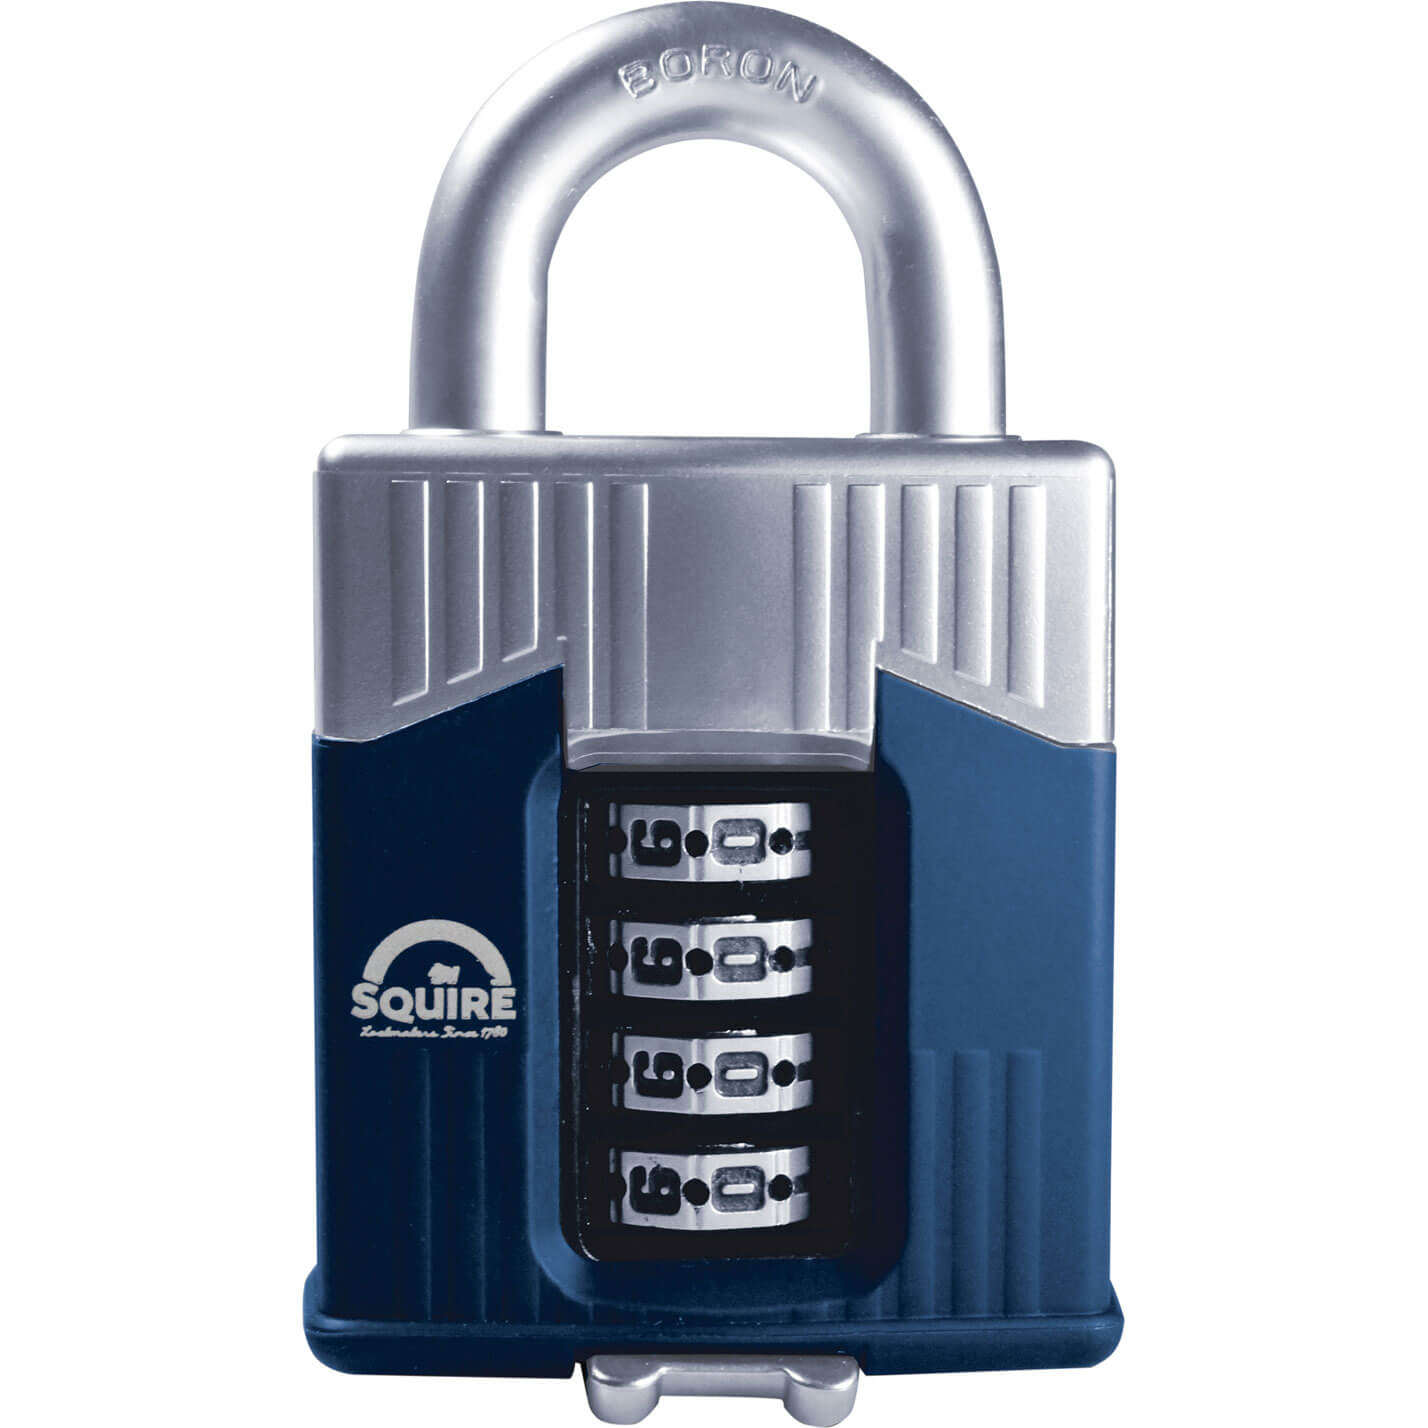 Henry Squire Warrior High Security Shackle Combination Padlock 55mm Standard